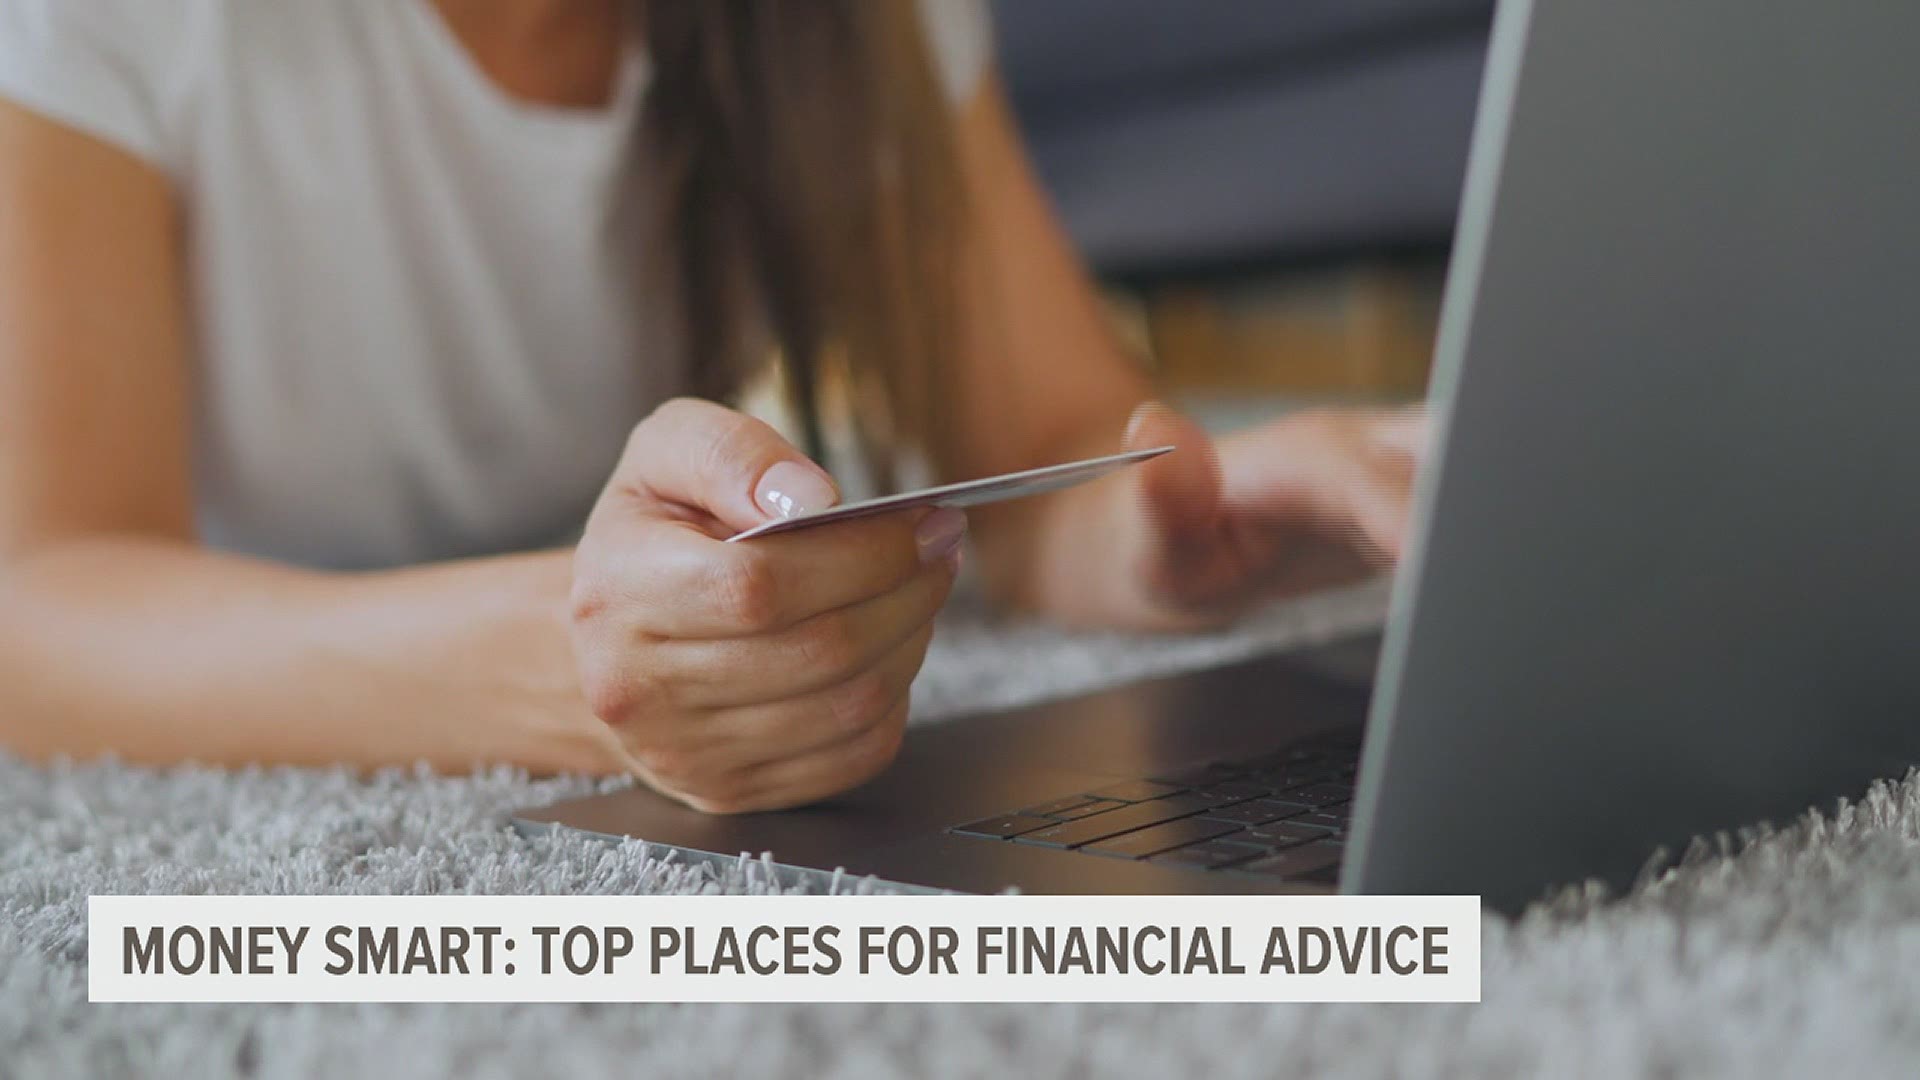 April is Financial Literacy Month, and a recent poll has uncovered where people are turning for financial advice.